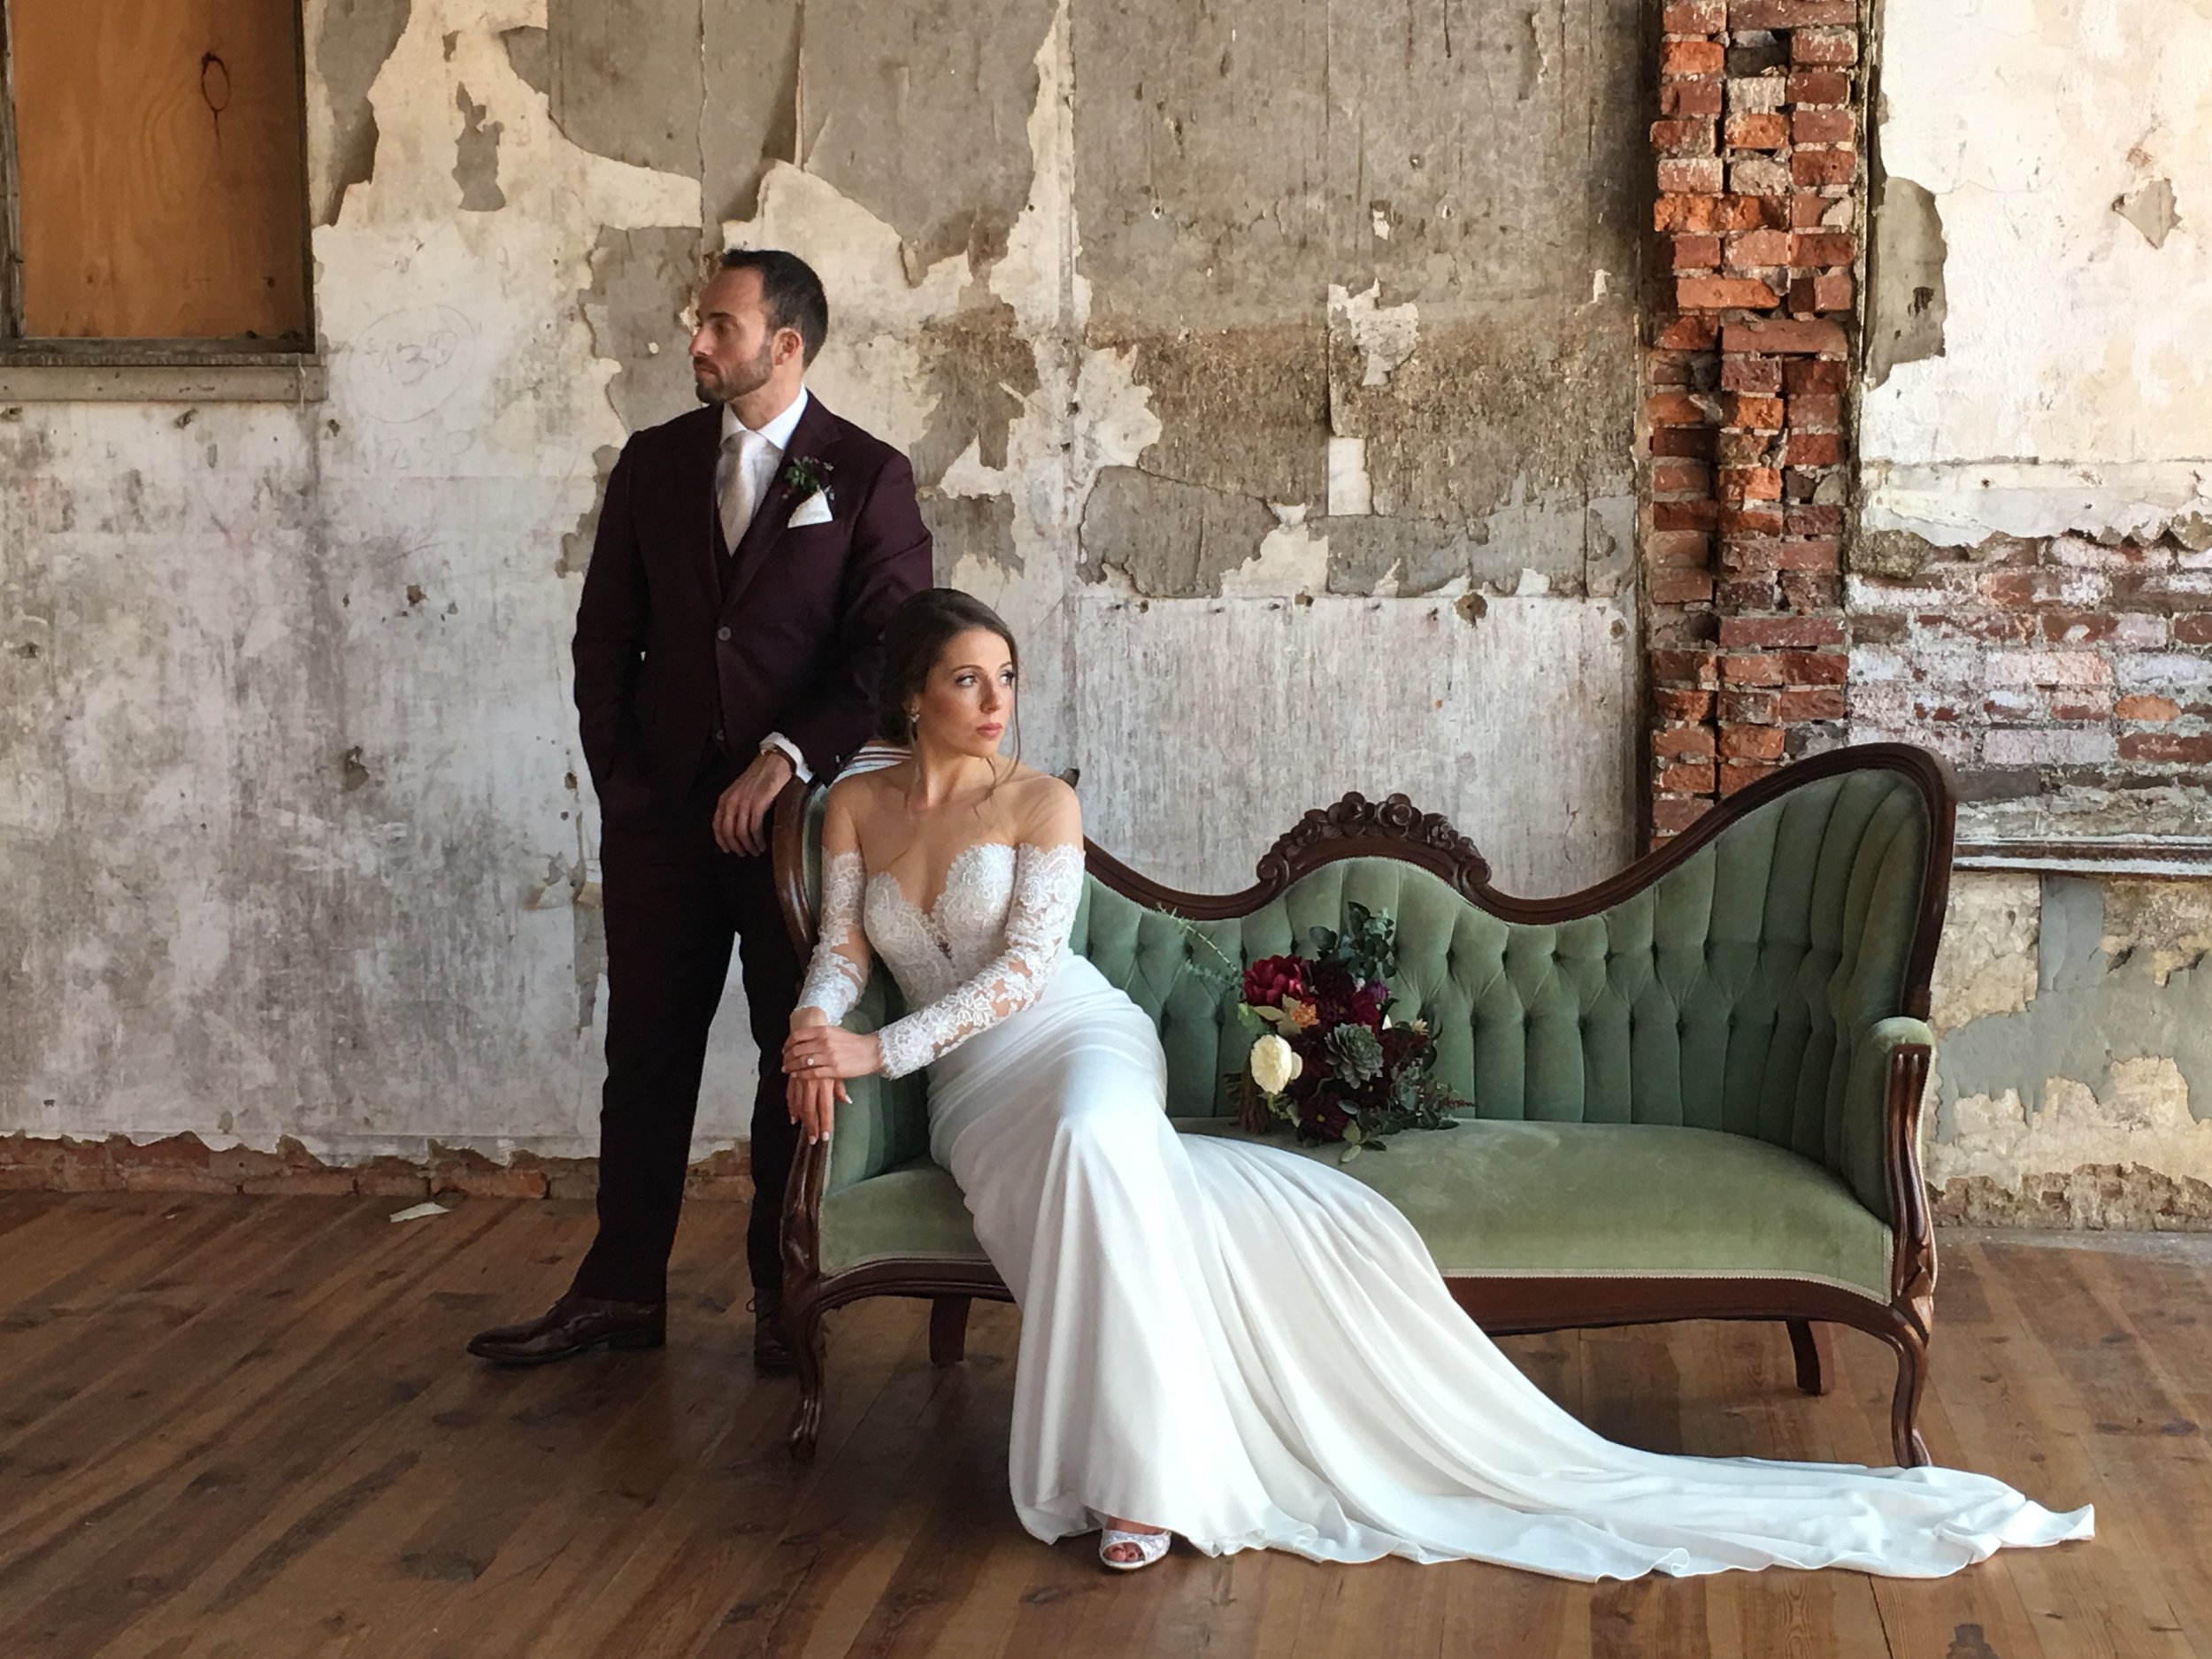 Groom and bride lounging on green loveseat in historic antique room